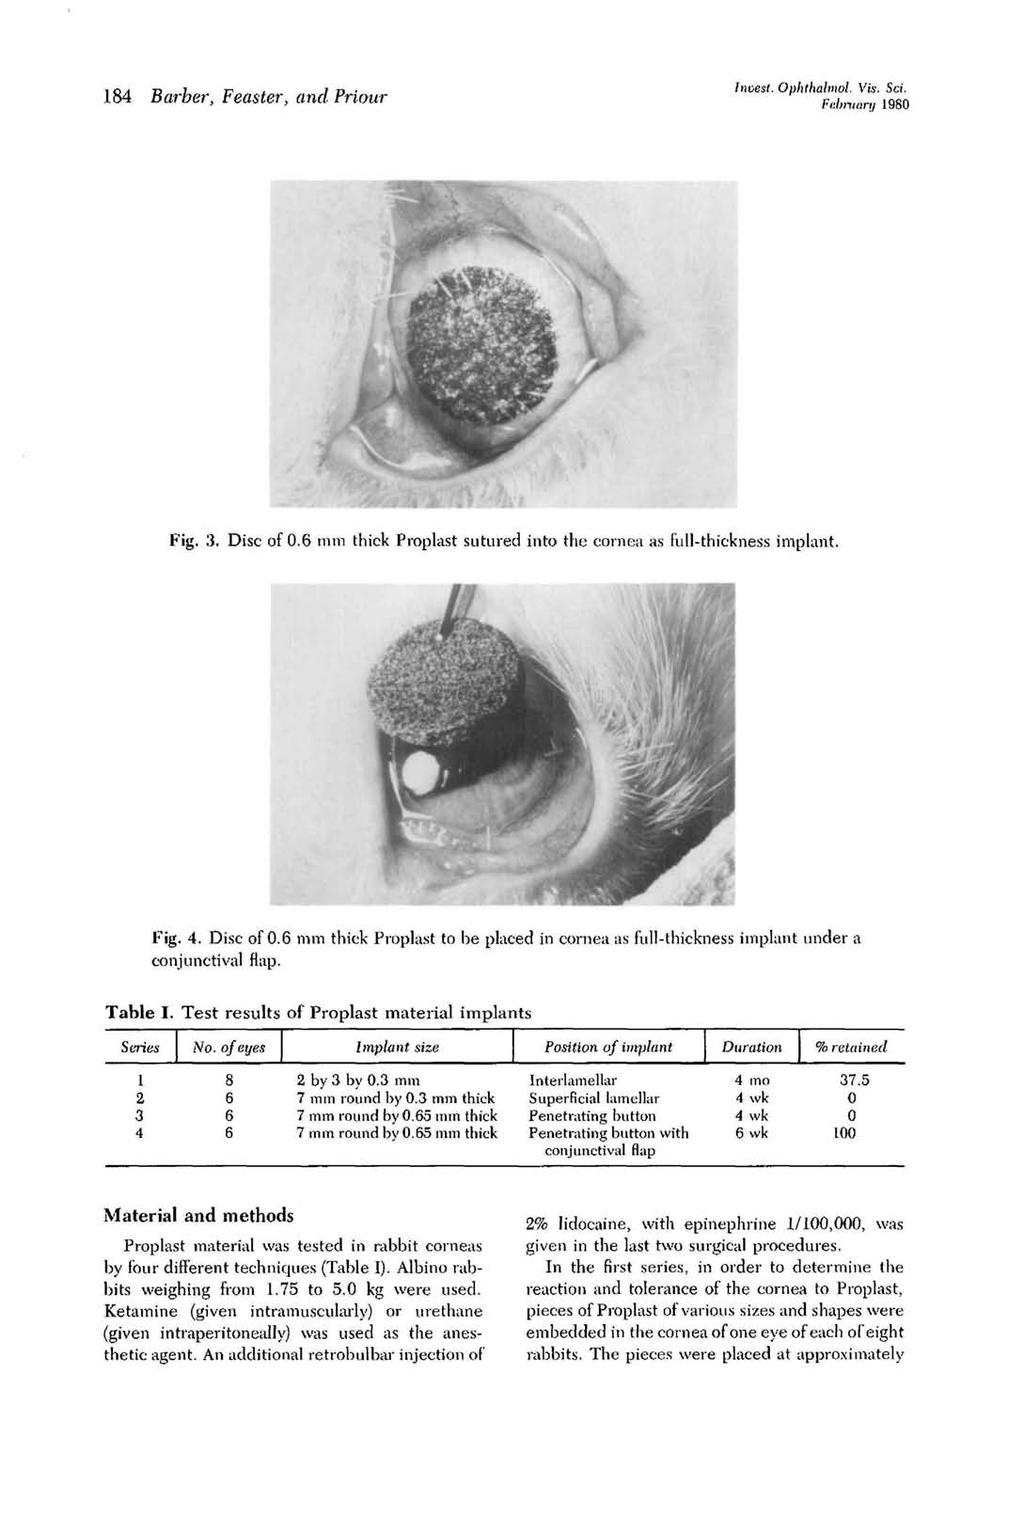 184 Barber, Feasier, and Priour Invest. Ophthalmol, Vis, Sci. February 1980 Fig. 3. Disc of 0.6 mm thick Proplast sutured into the cornea as full-thickness implant. Fig. 4. Disc of 0.6 mm thick Proplast to be placed in cornea as full-thickness implant under a conjunctival flap.